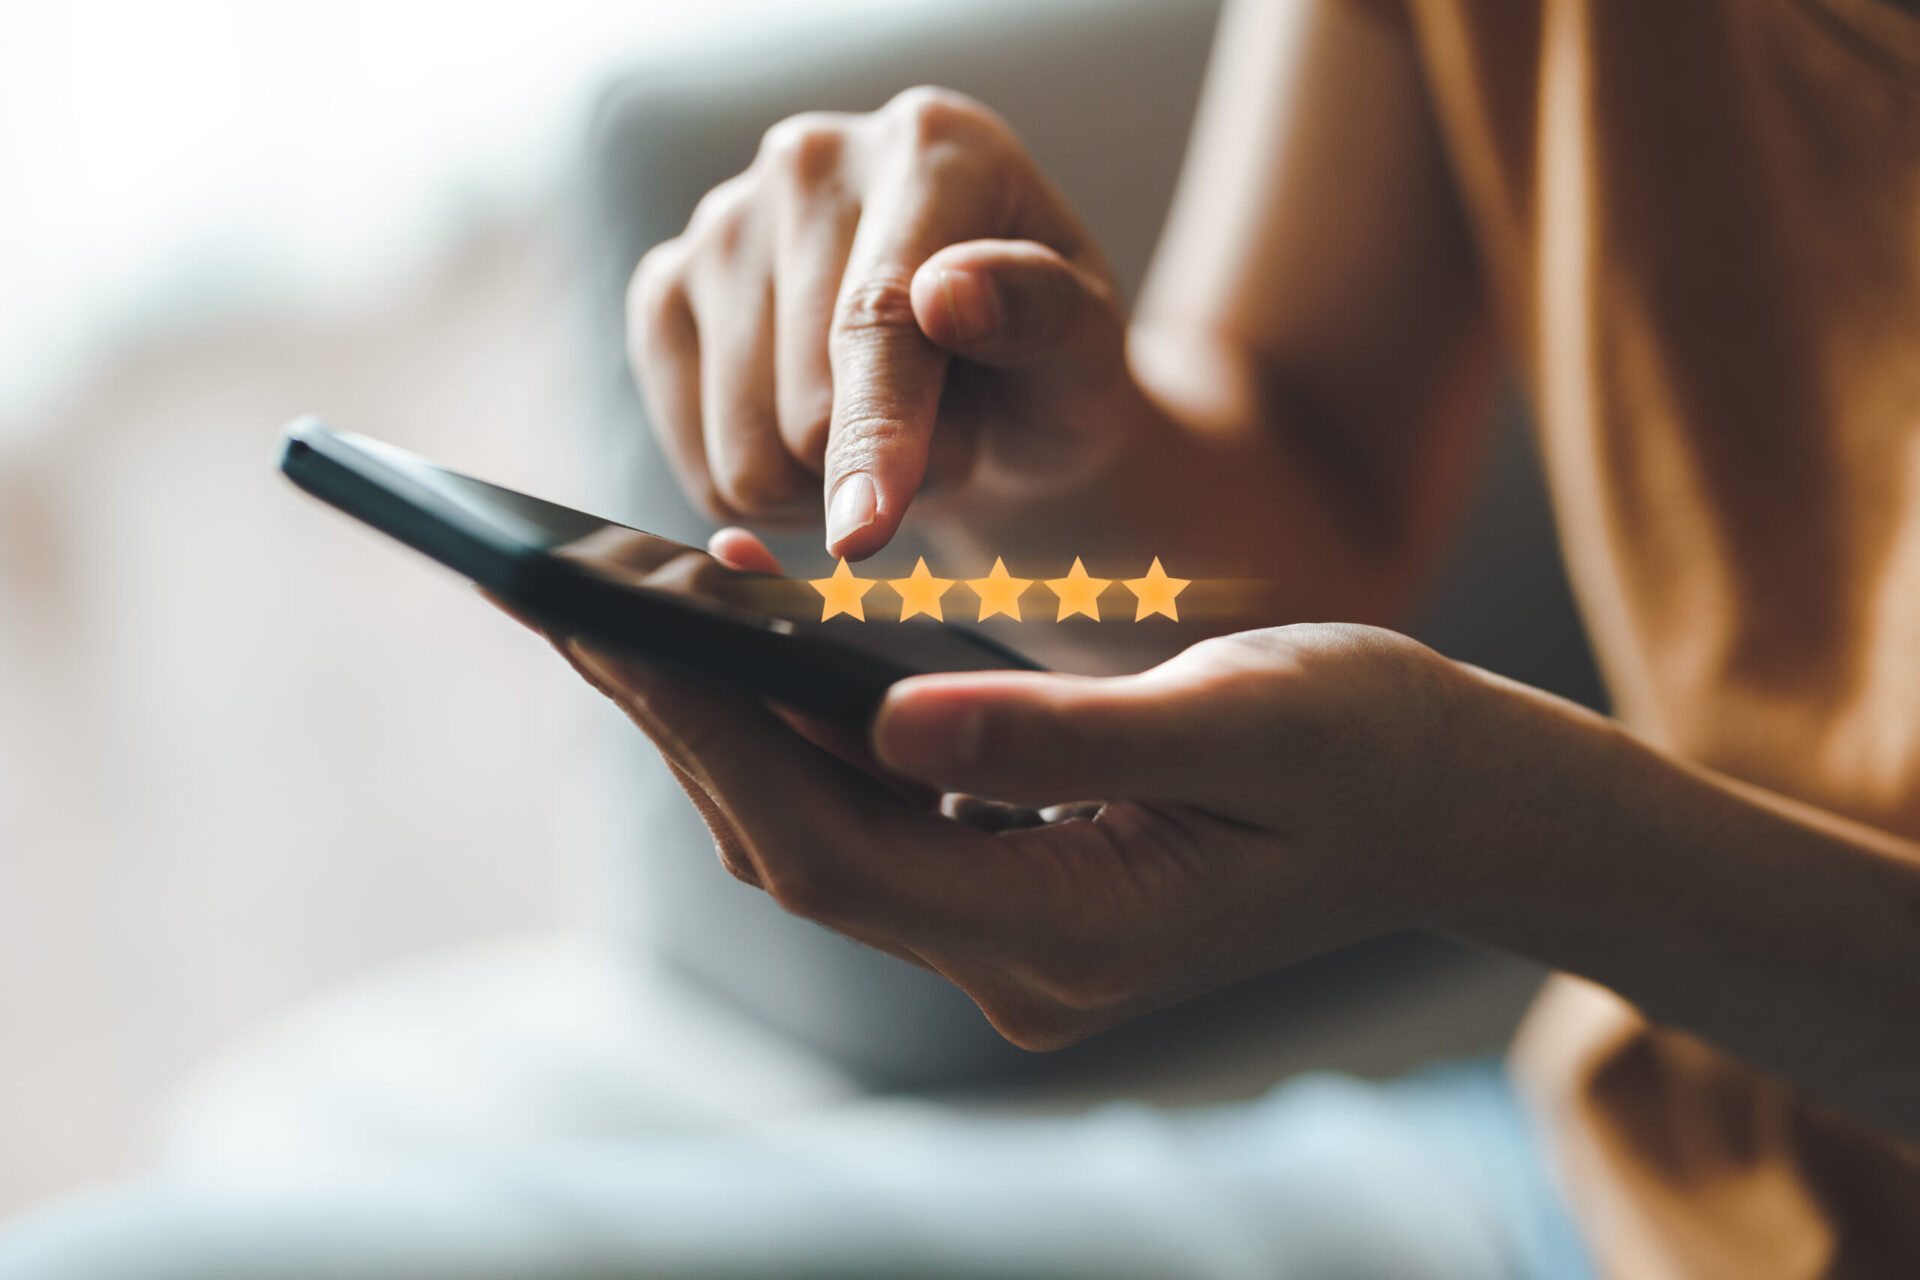 An image of a person giving a five-star review on their phone.